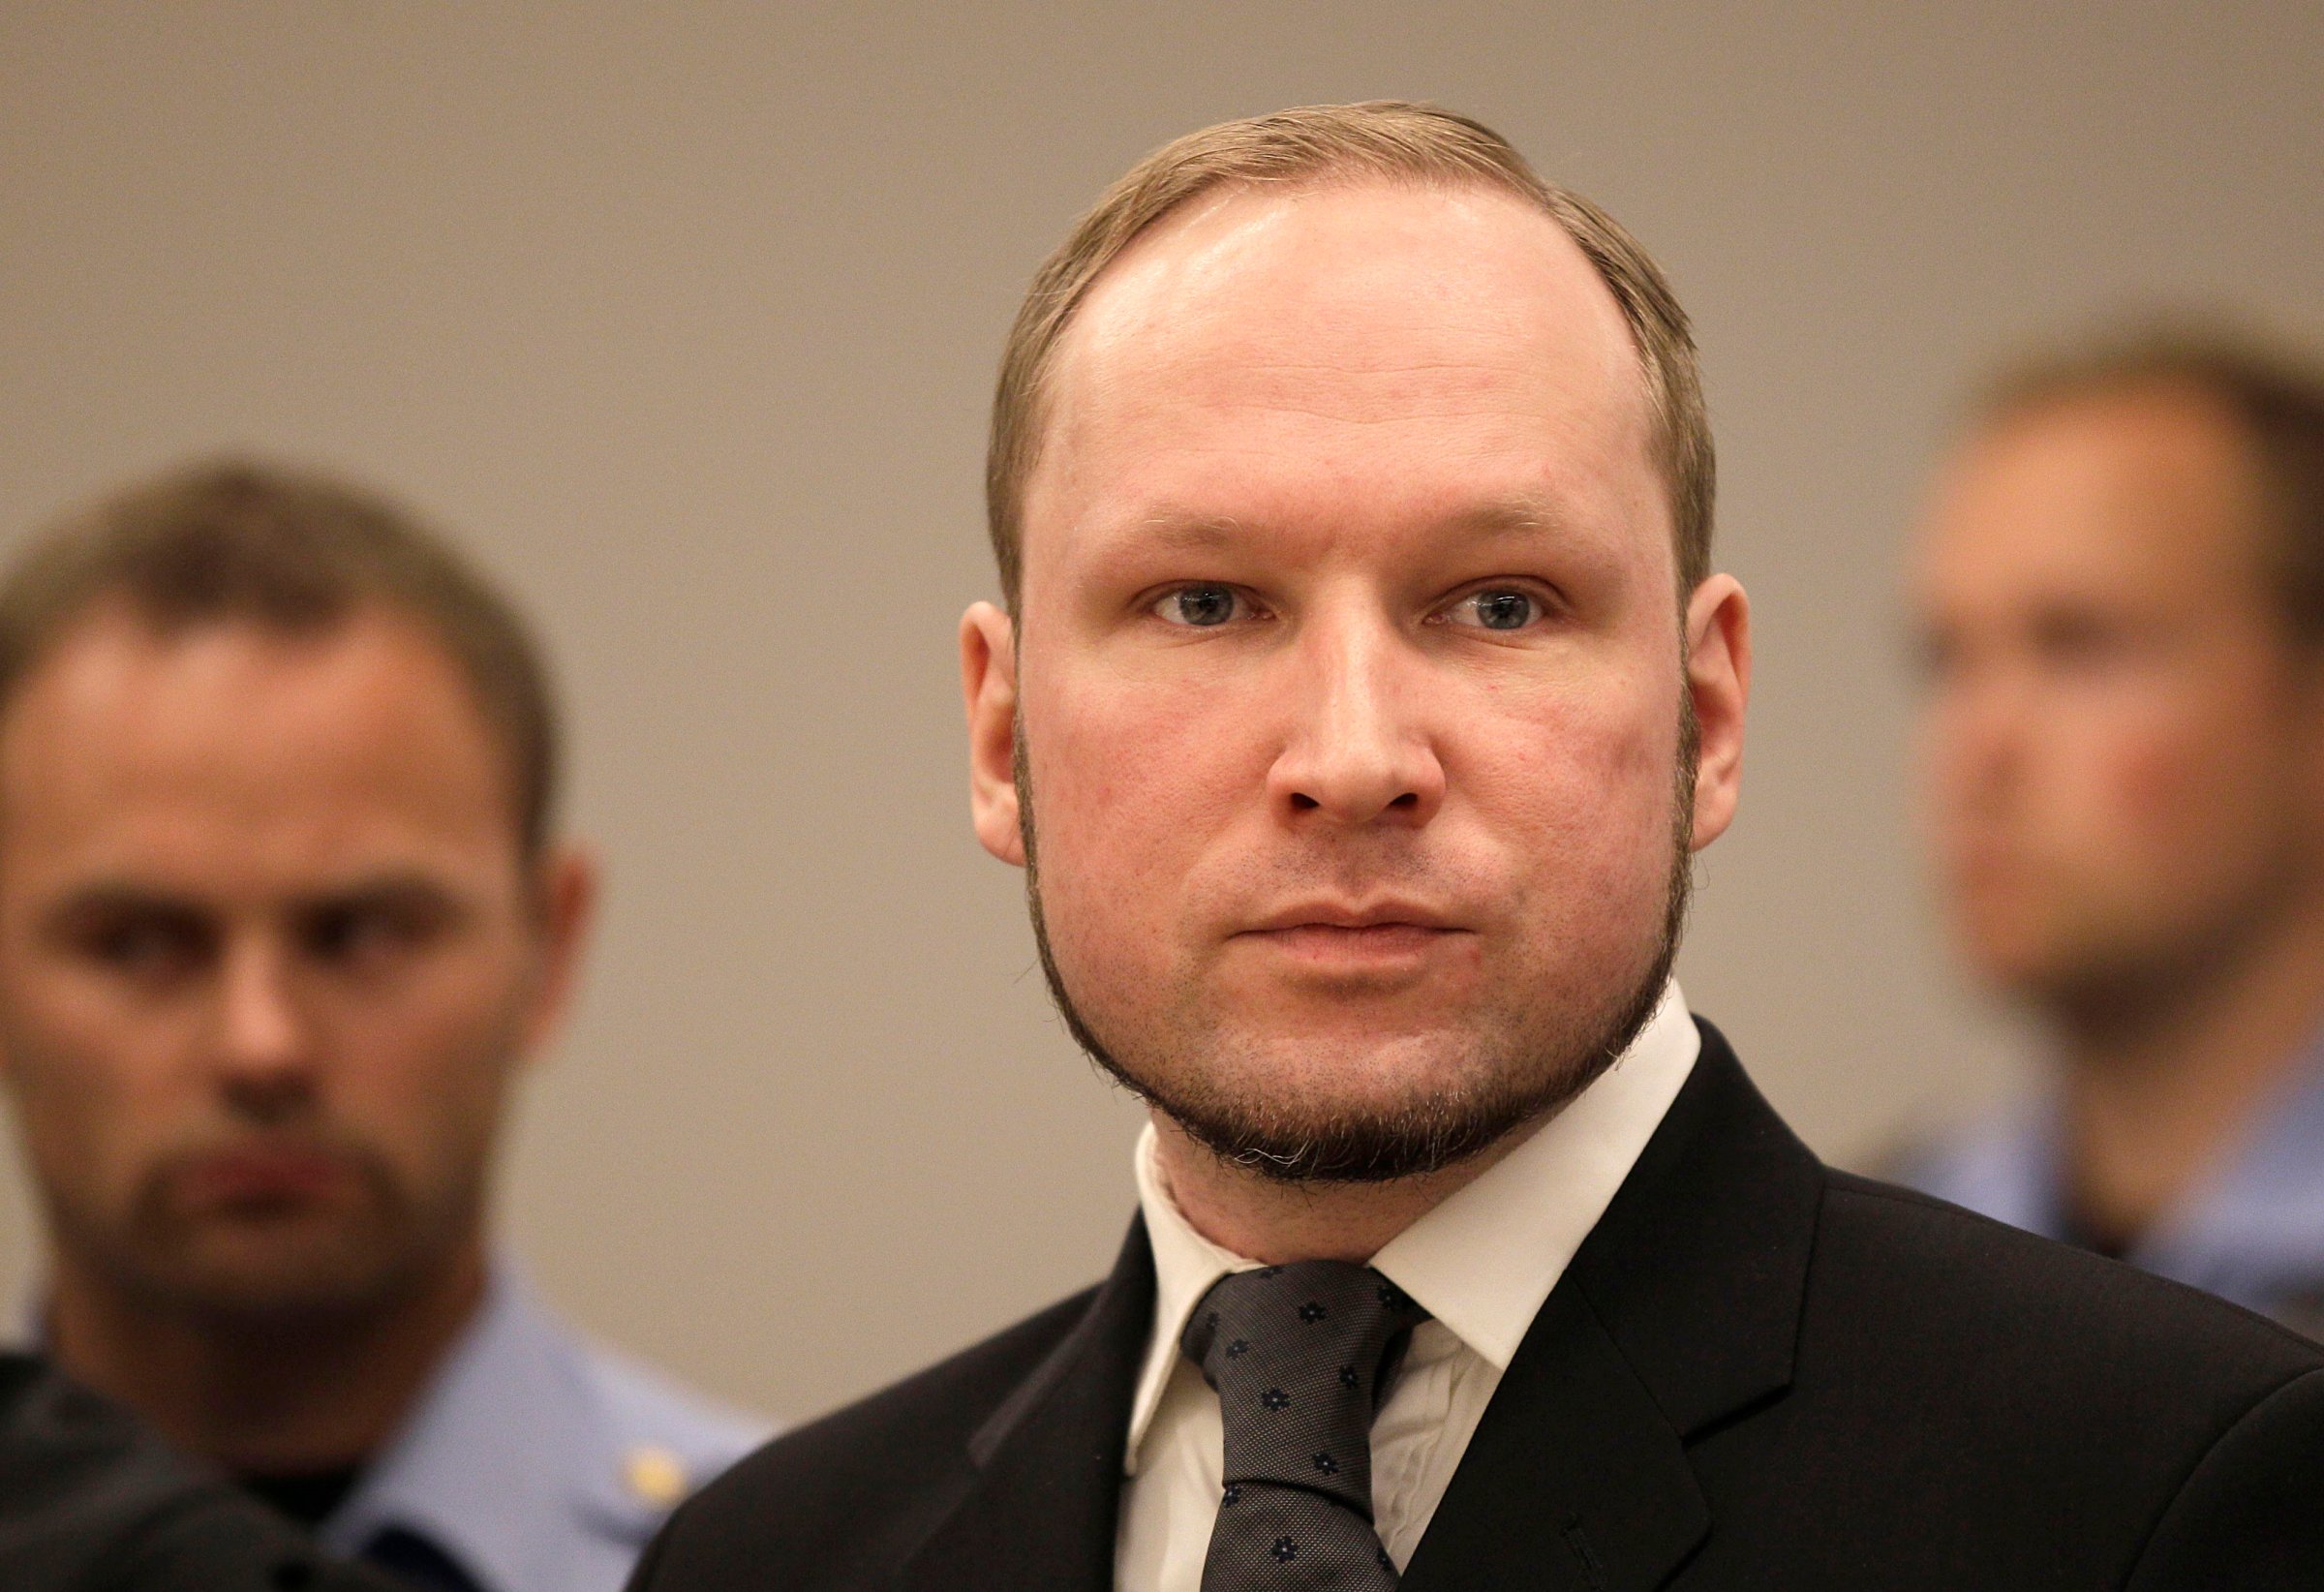 Anders Behring Breivik listens to the judge in the courtroom, in Oslo, Norway on Aug. 24, 2012.